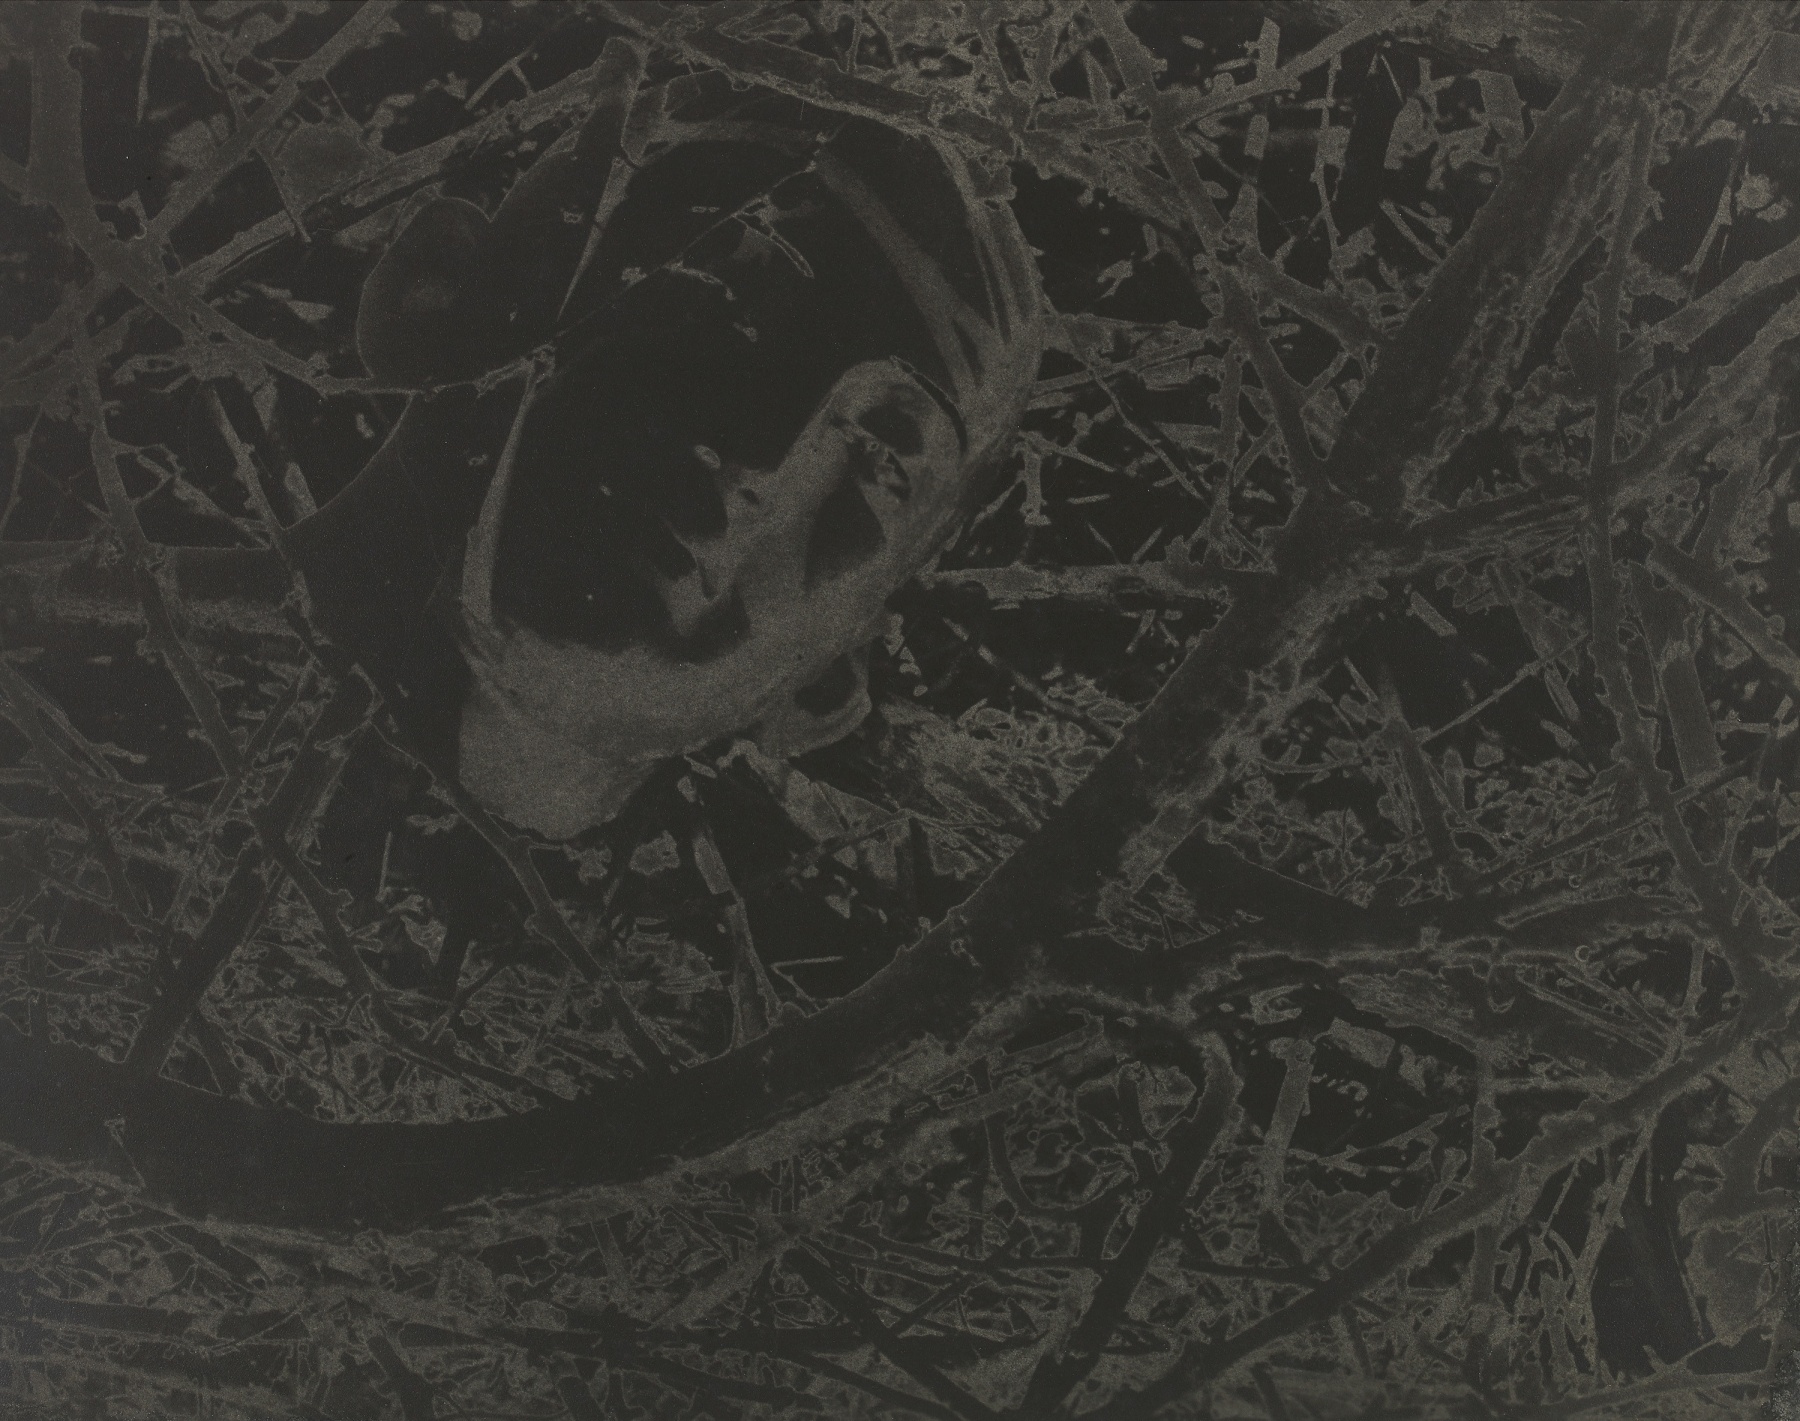 Lionel Wendt &ldquo;Untitled (Head Among Twigs)&rdquo;, ca. 1942